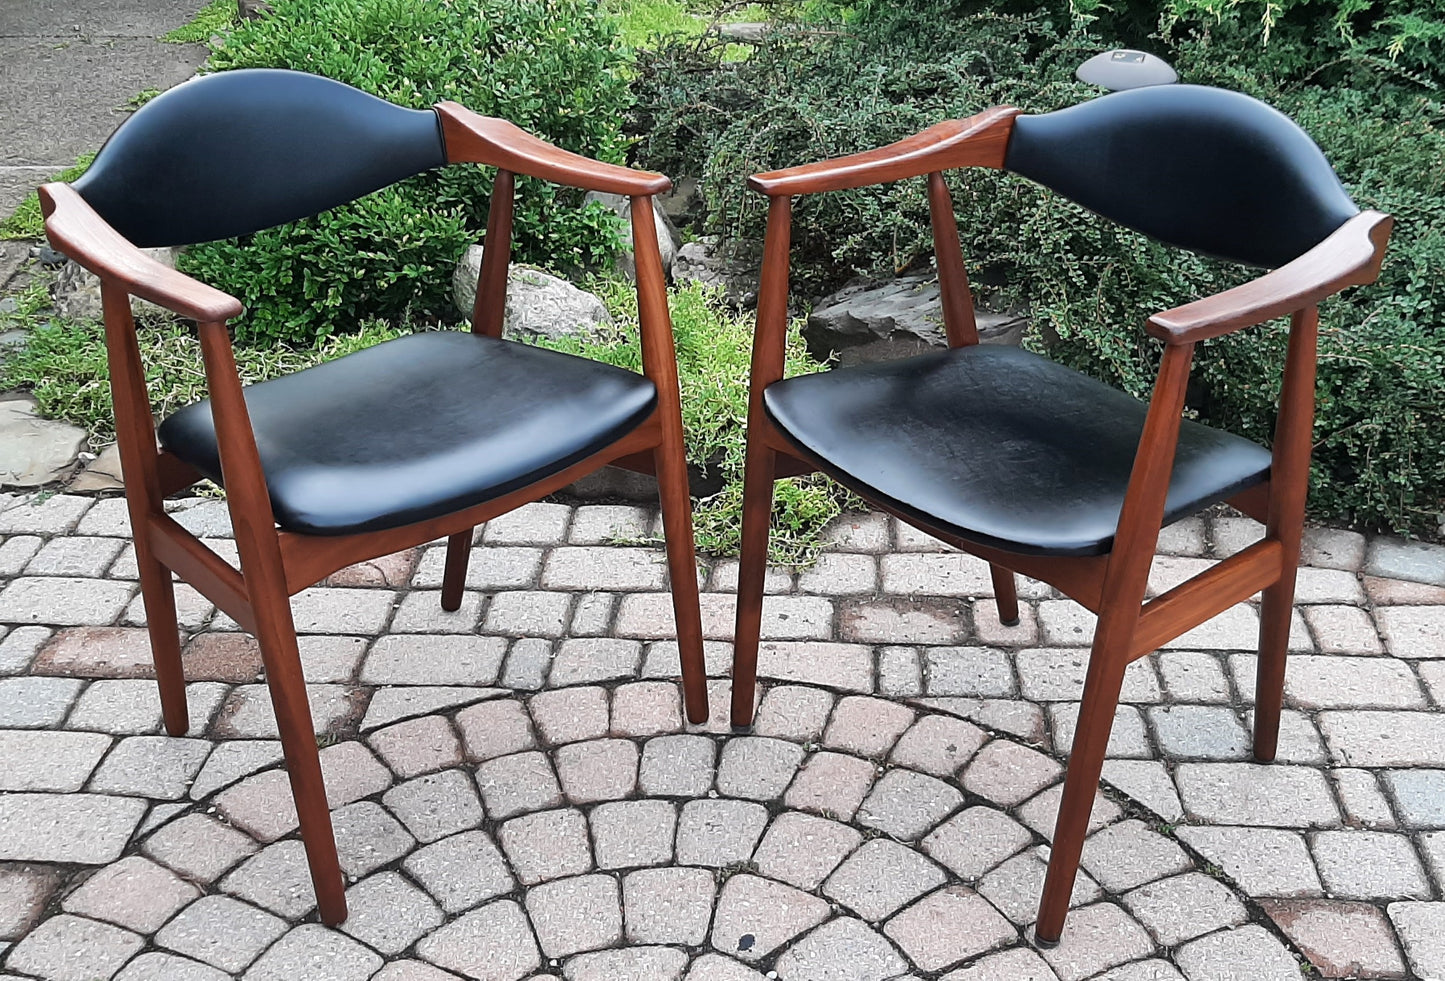 2 REFINISHED Mid Century Modern Teak Armchairs by T. Harlev for Farstrup